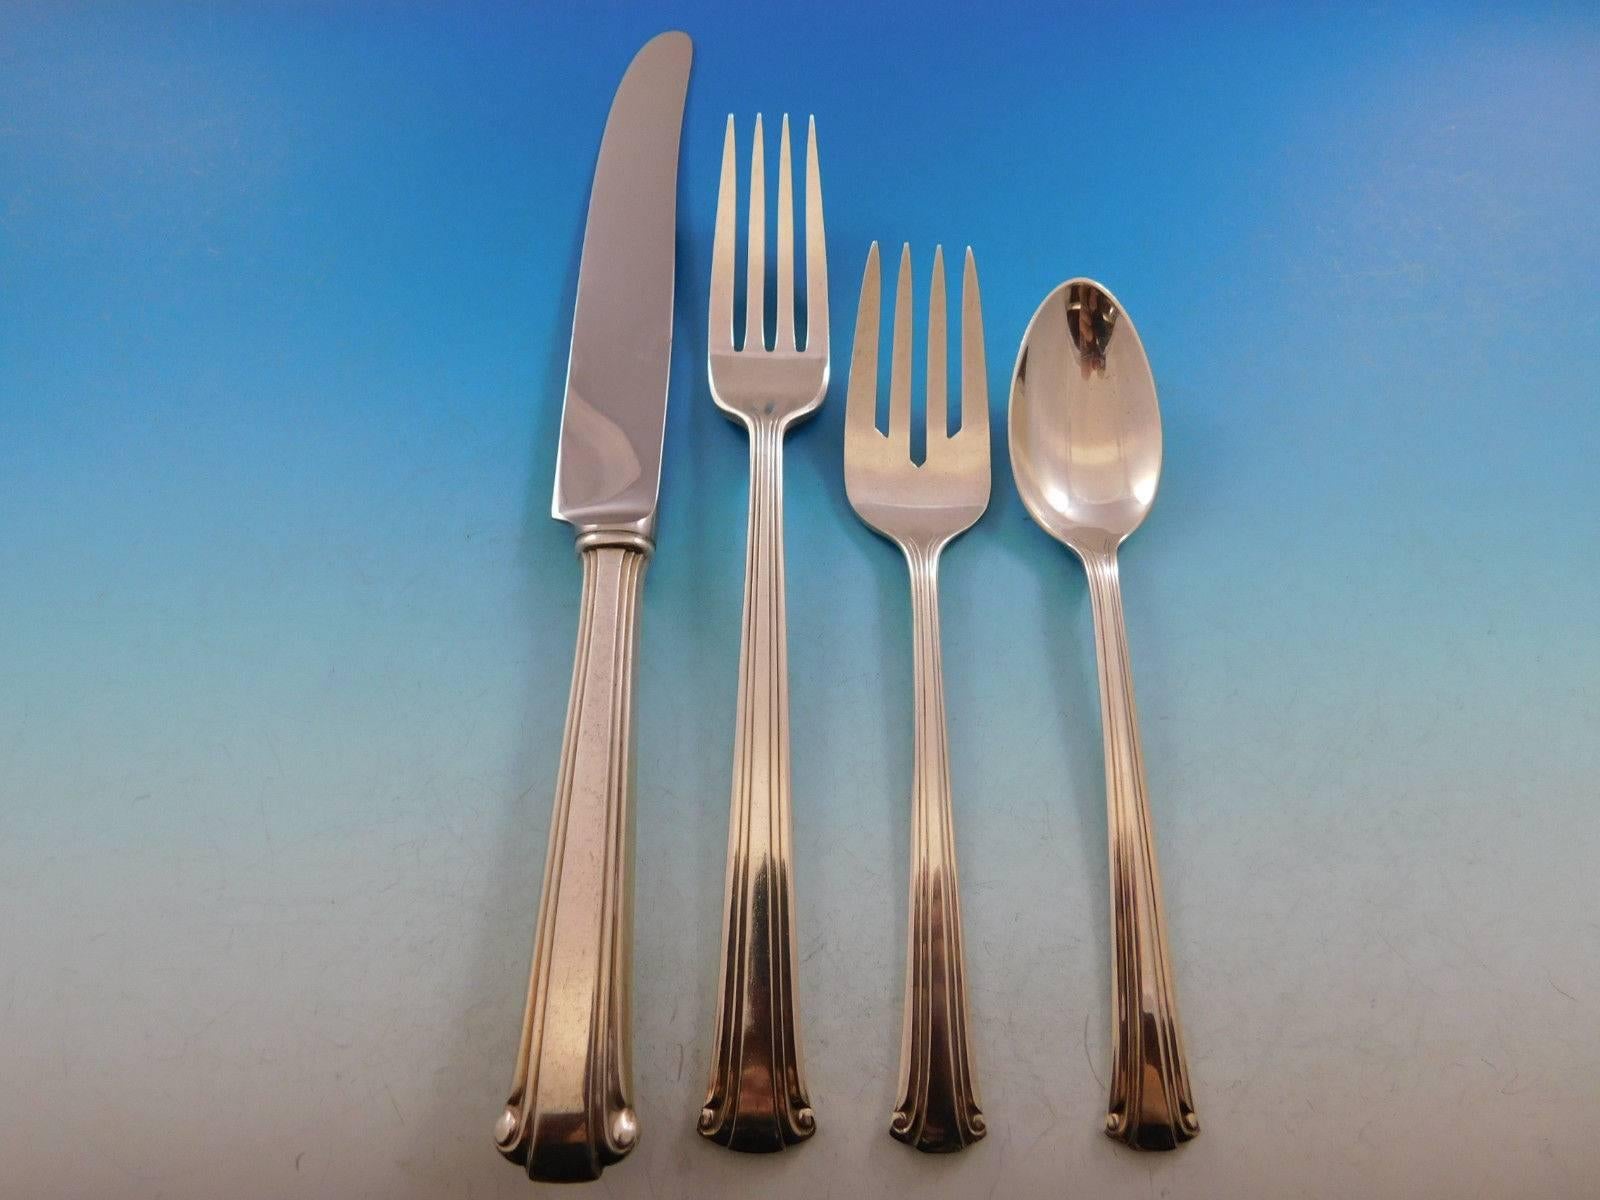 Dinner size cotillion by Reed & Barton sterling silver flatware set - 48 pieces. This set includes:

Eight dinner size knives, 9 5/8